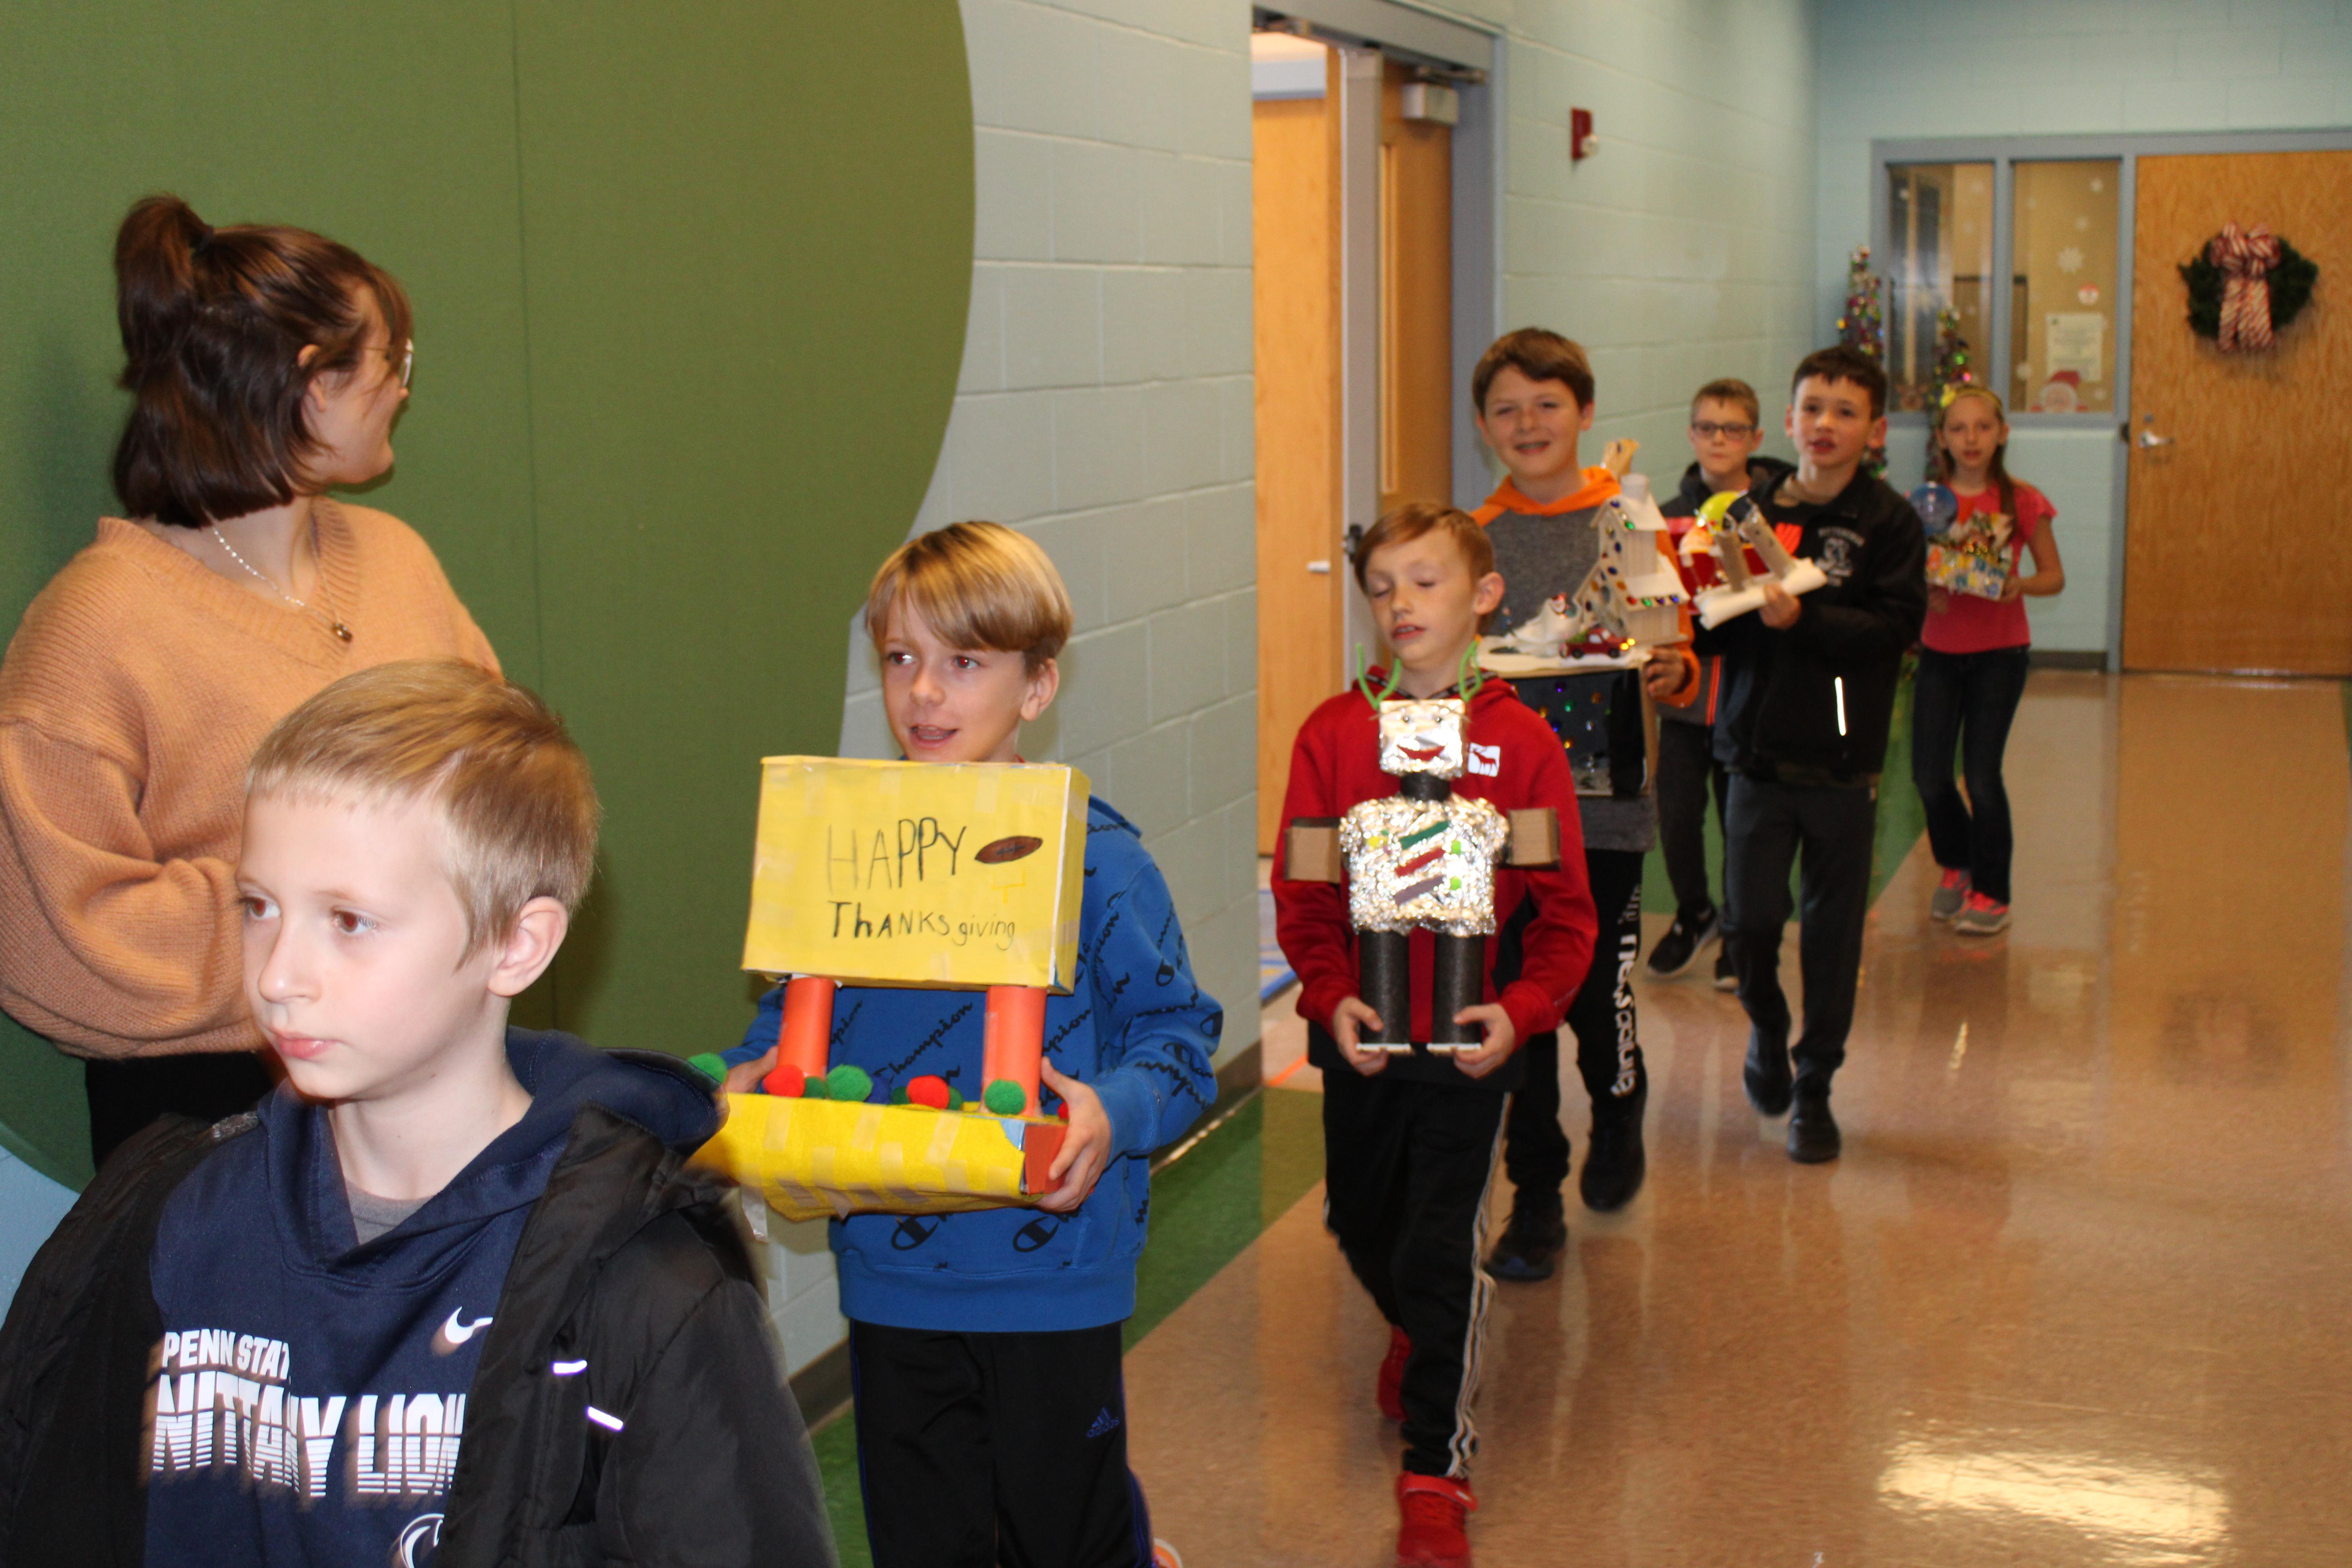 pic of kids carrying small "floats" down the hall